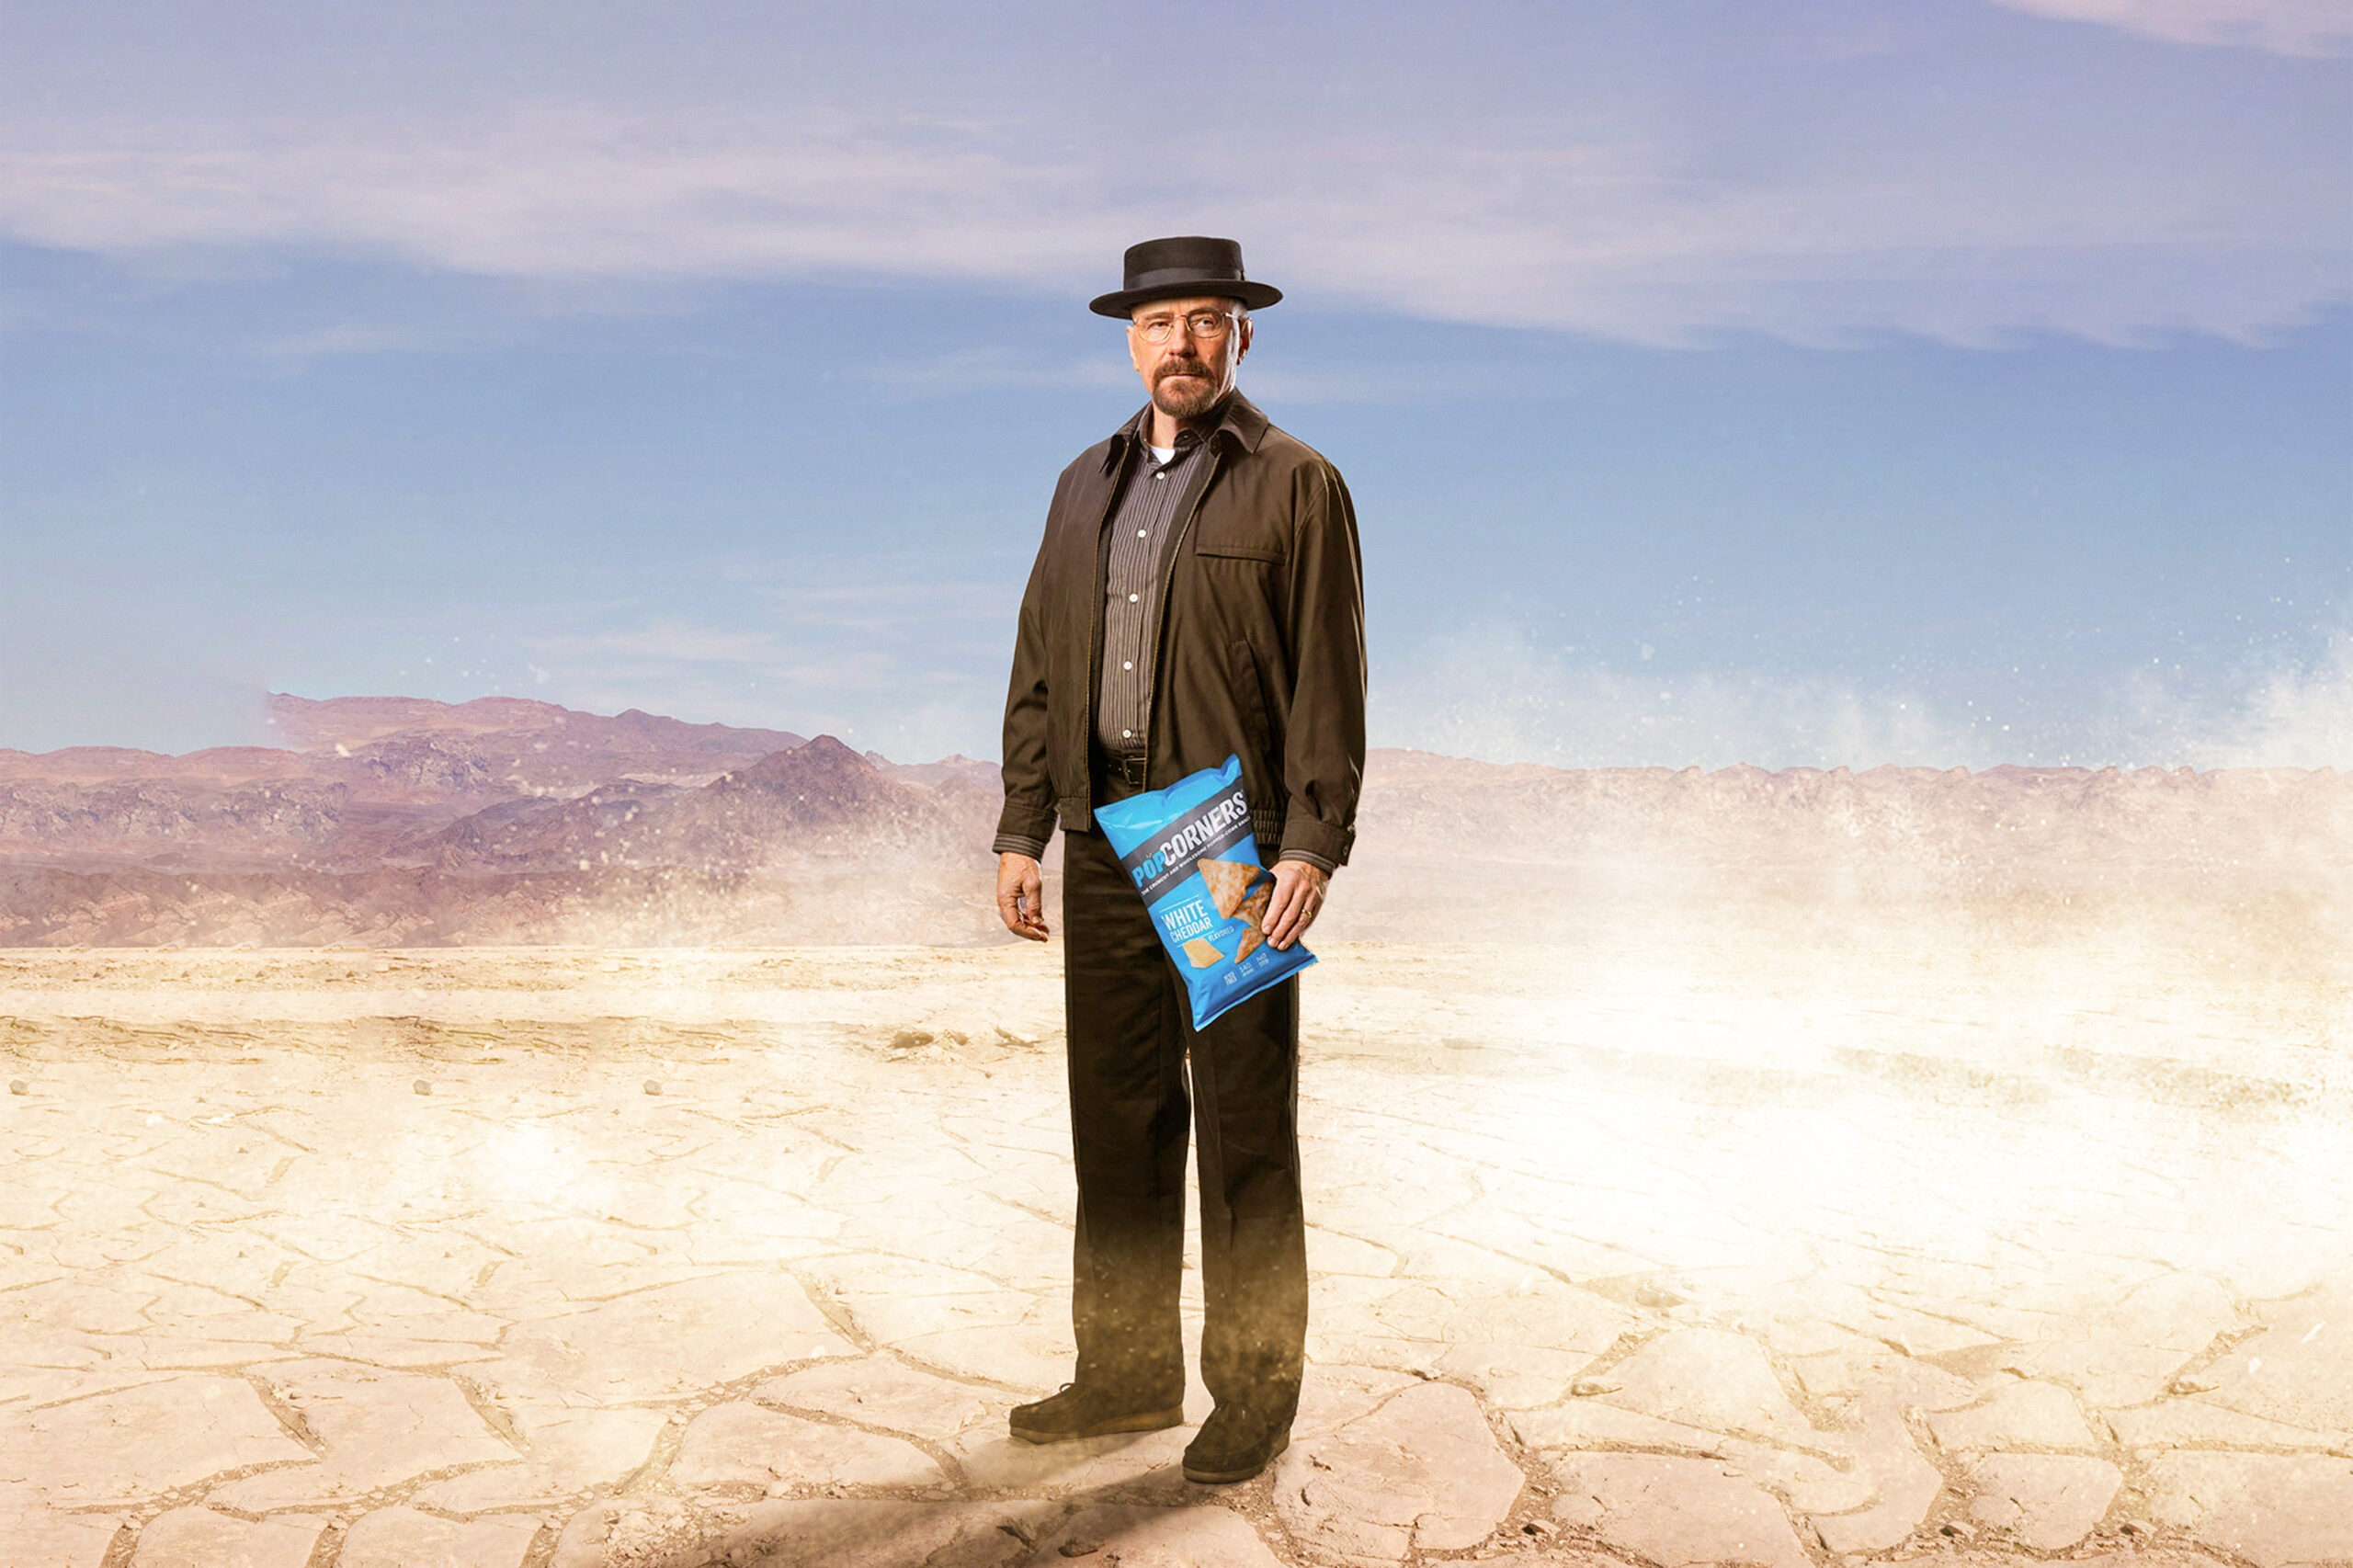 https://relevantmagazine.com/wp-content/uploads/2023/02/Bryan-Cranston-says-Super-Bowl-commercial-will-probably-maybe-be-his-last-appearance-as-Walter-White_Slice_RLV_2023-scaled.jpg